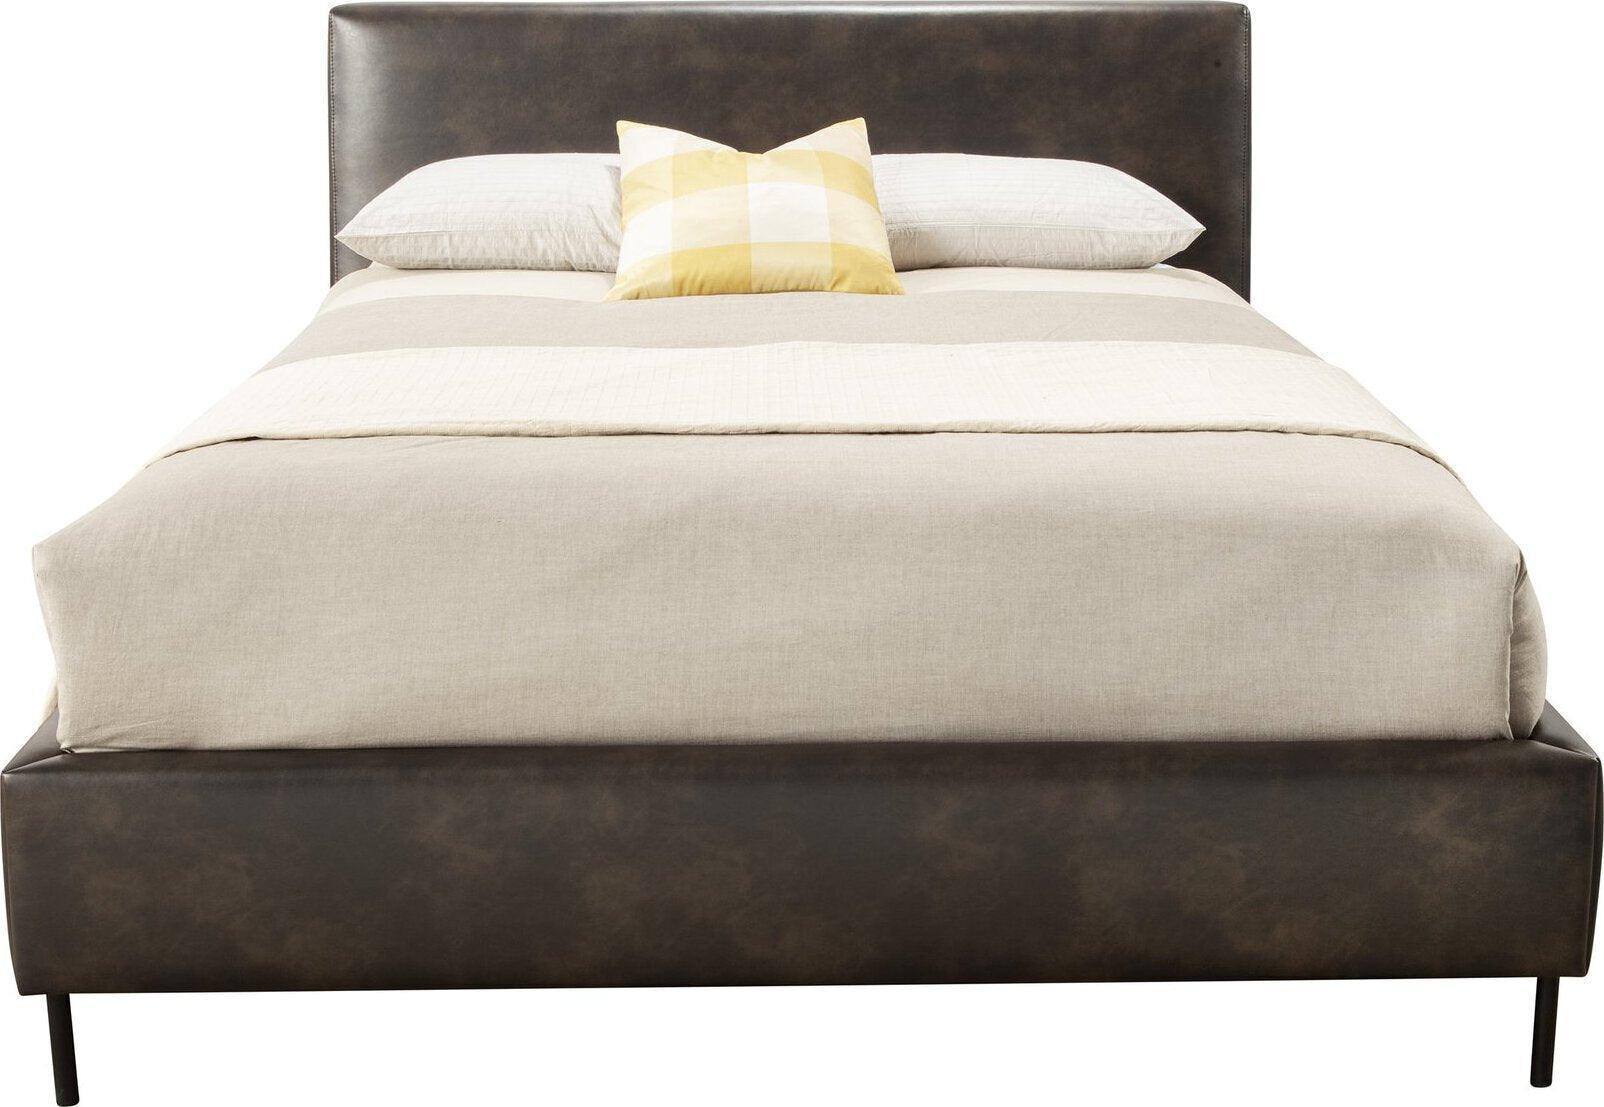 Alpine Furniture Beds - Sophia Faux Leather Standard King Bed Gray